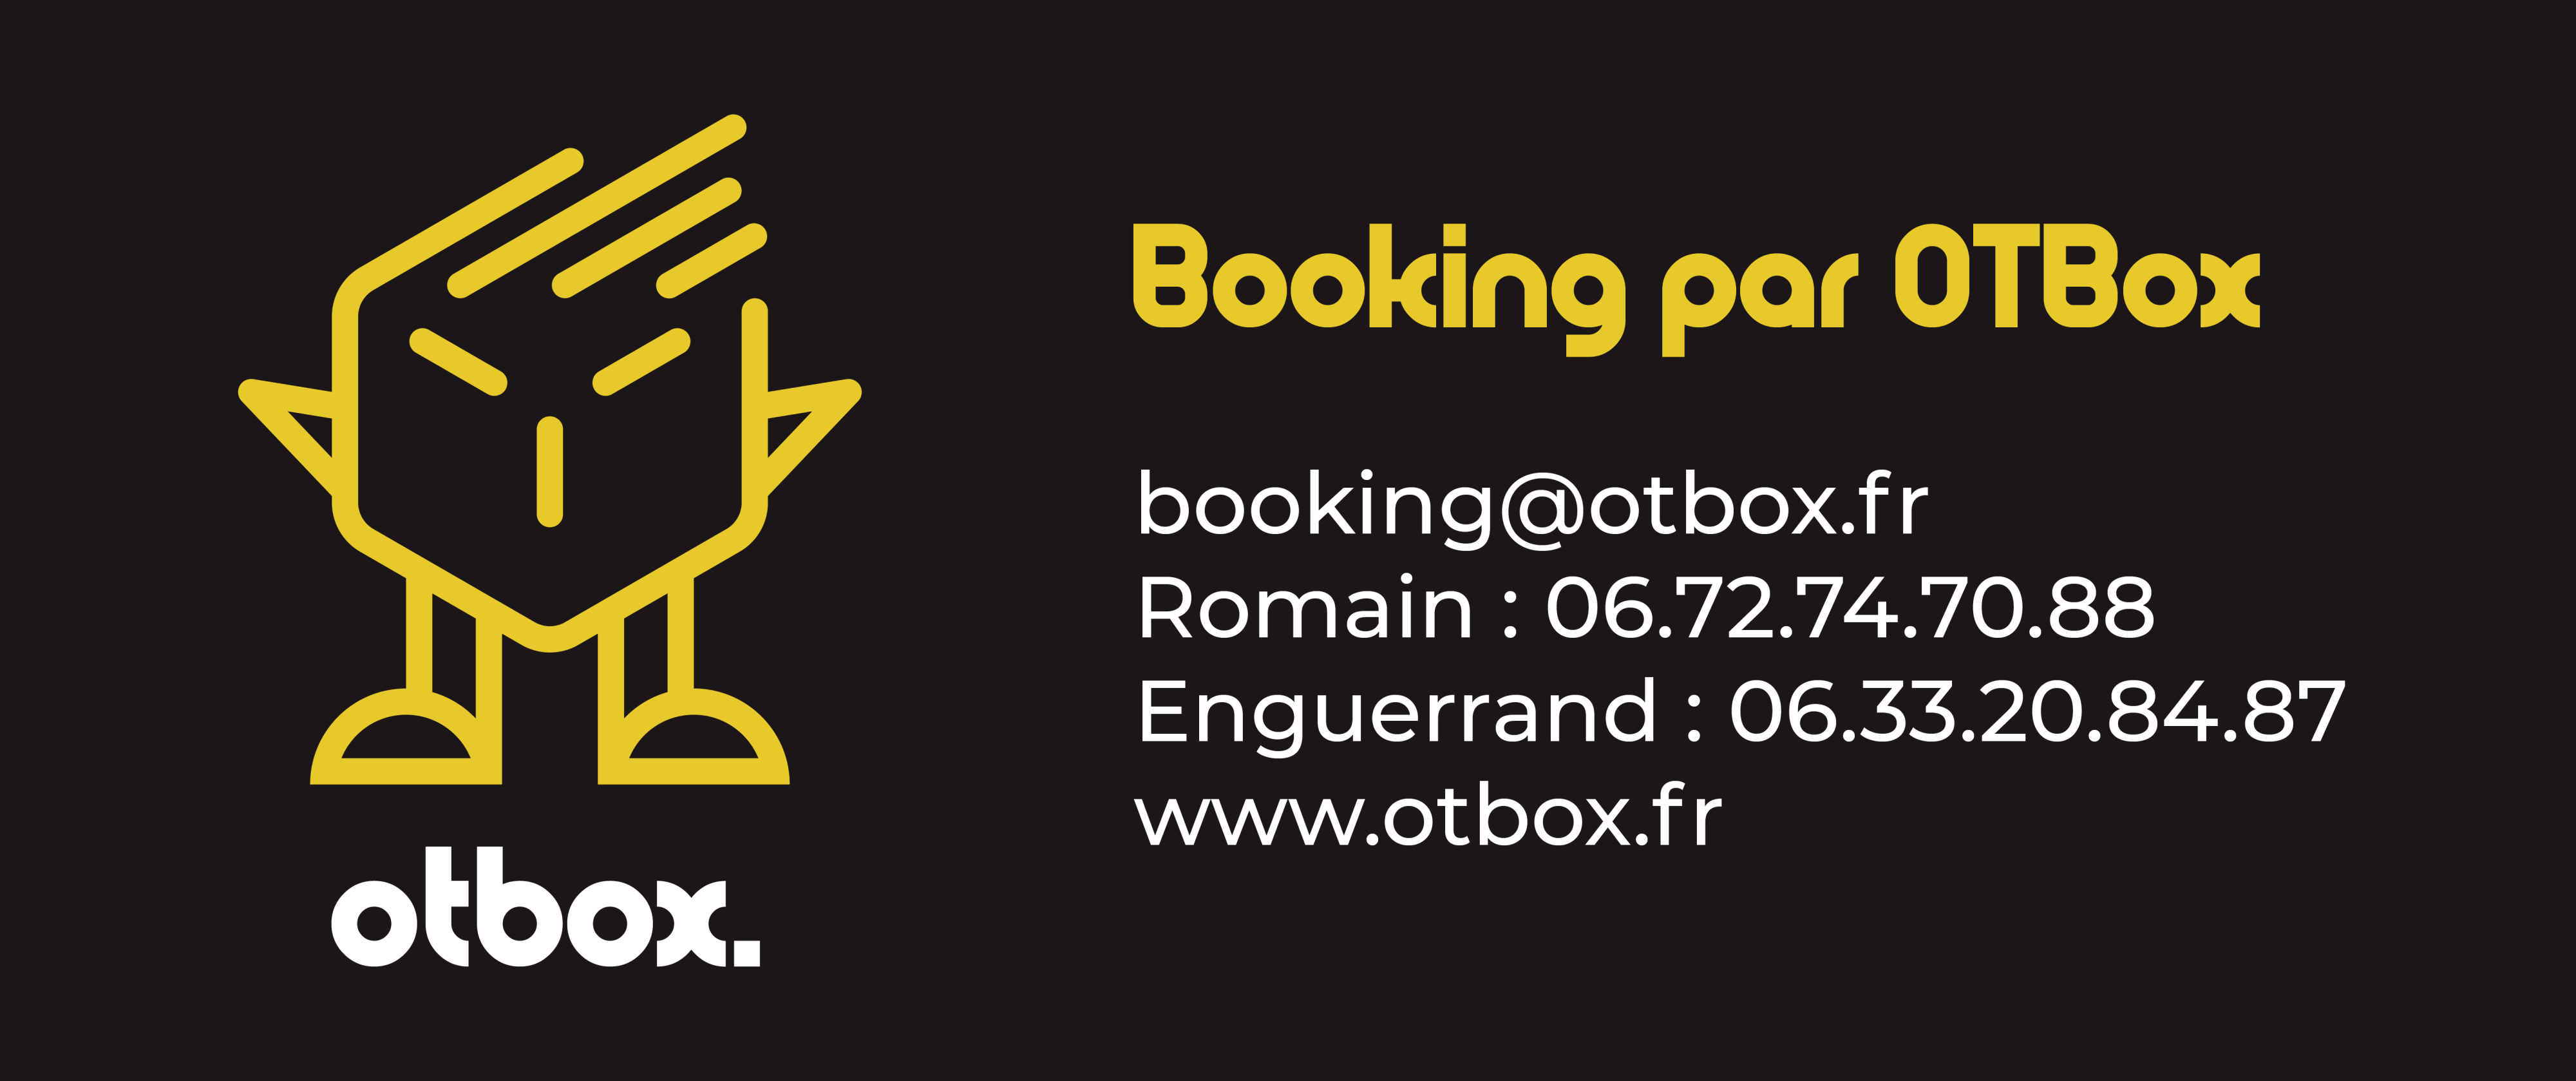 Ginger Sweets - Booking par OTBox